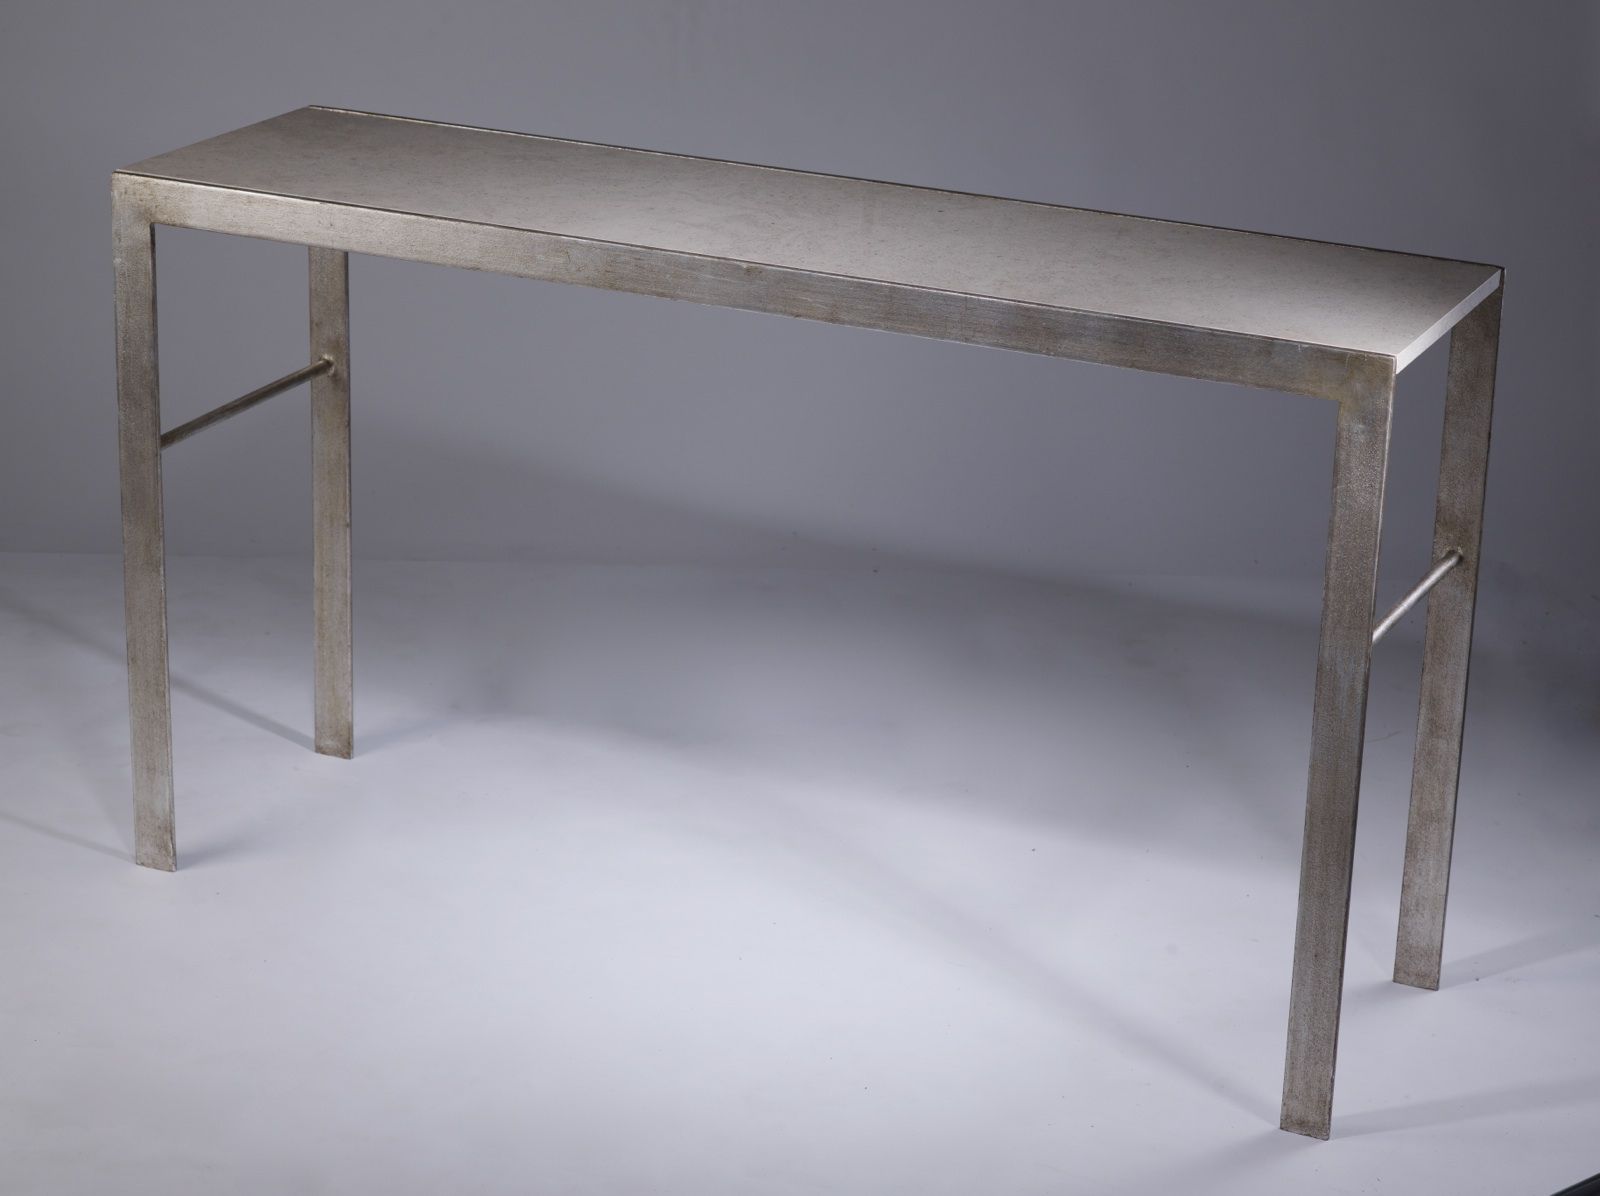 Wrought Iron 'simple' Console Table In Warm Distressed Inside Faux White Marble And Metal Console Tables (View 11 of 20)